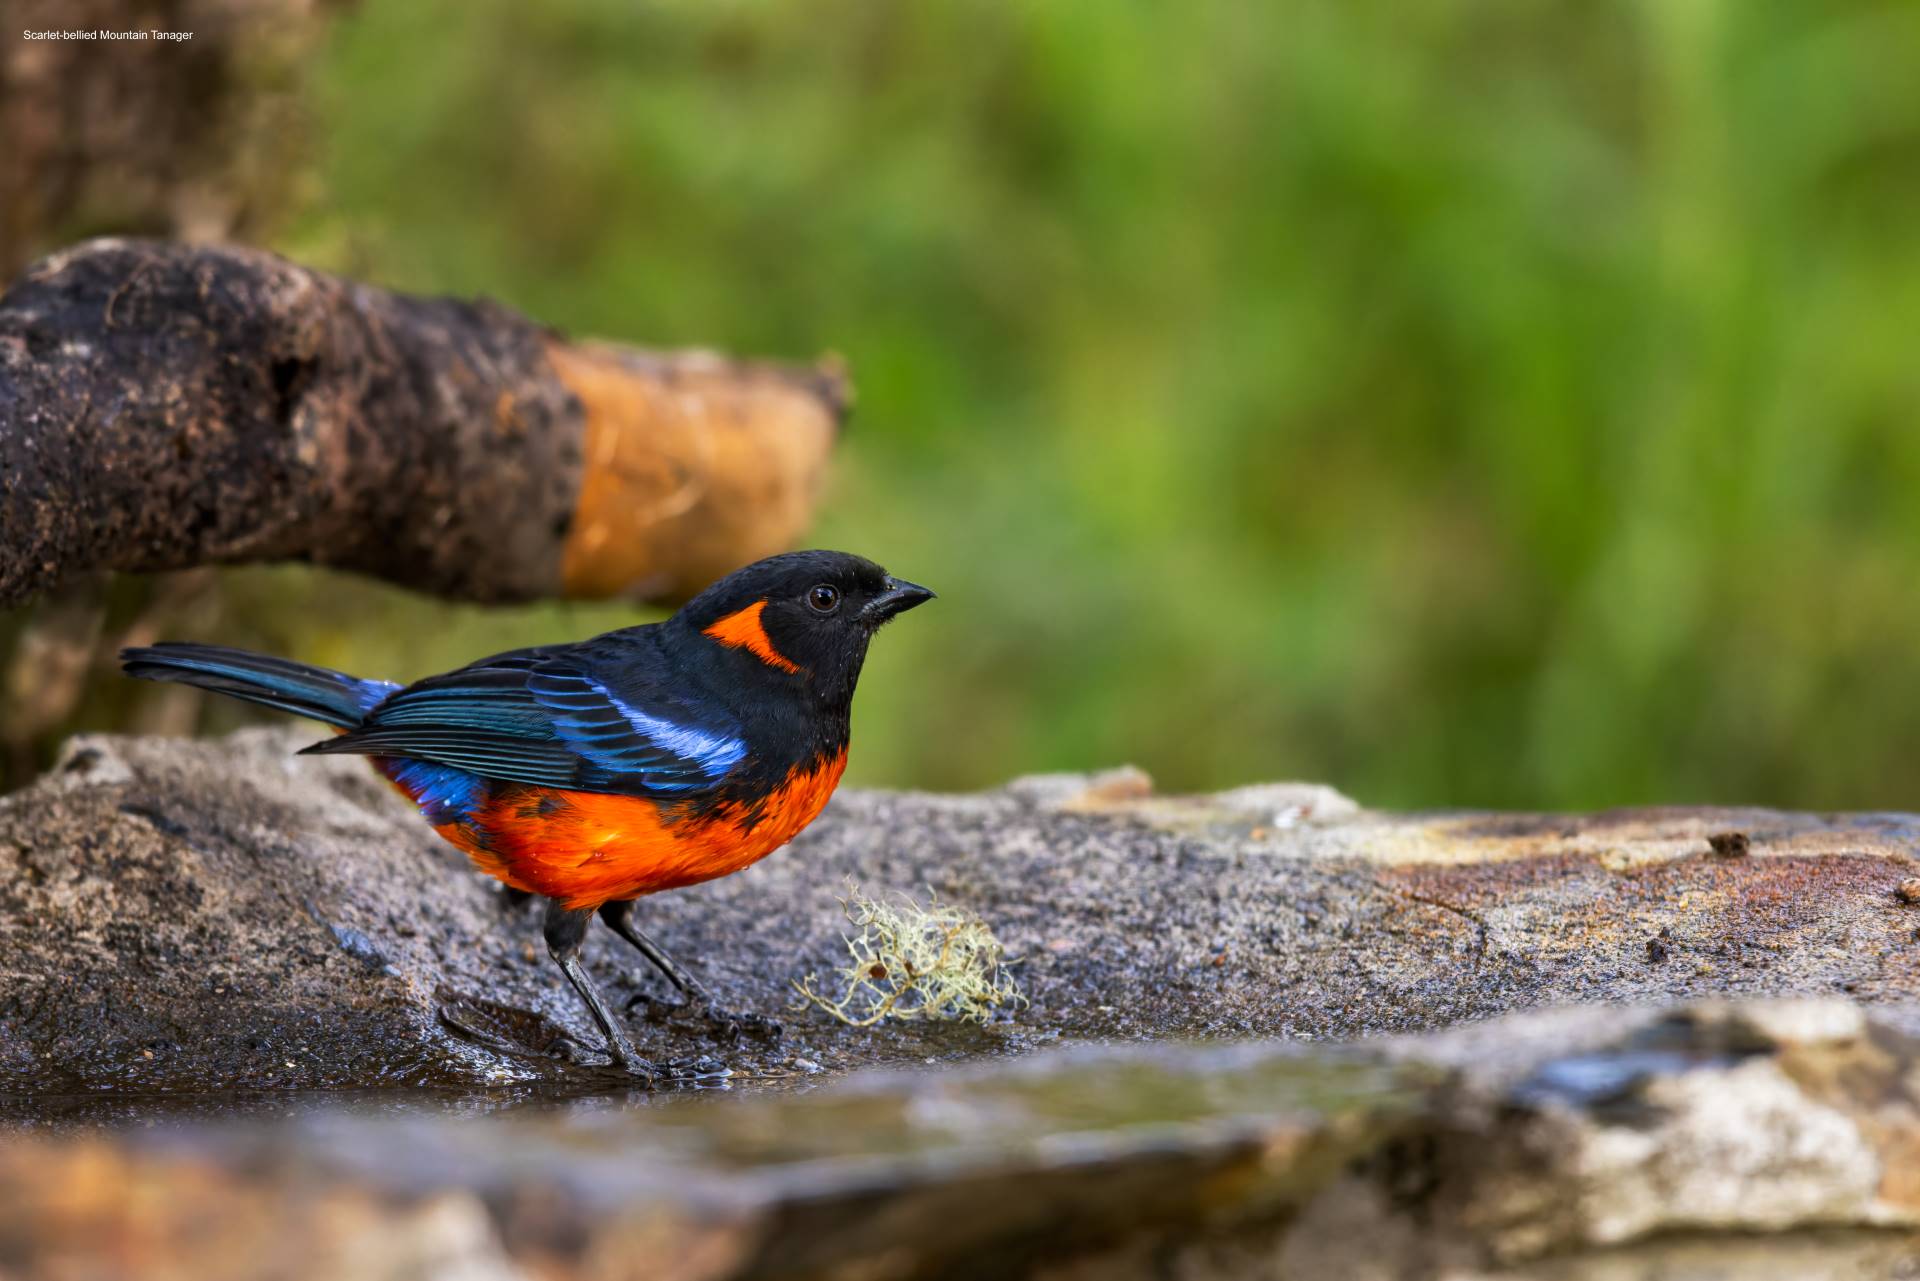 Scarlet-bellied-Mountain-Tanager-Wayqecha-3.jpg